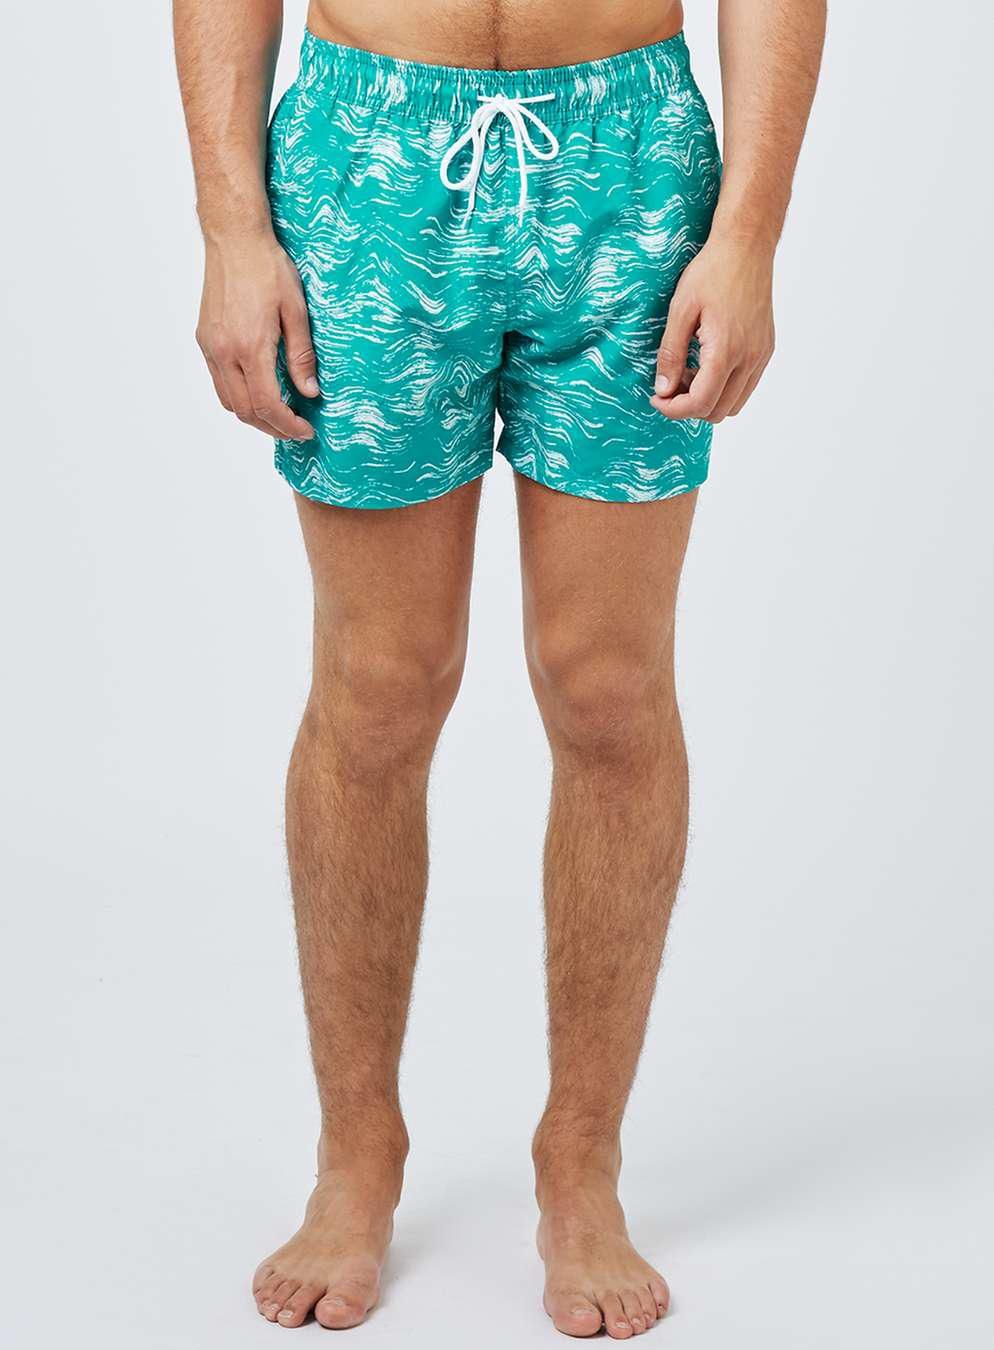 10 Swimming Trunks You Need That Aren't Basic